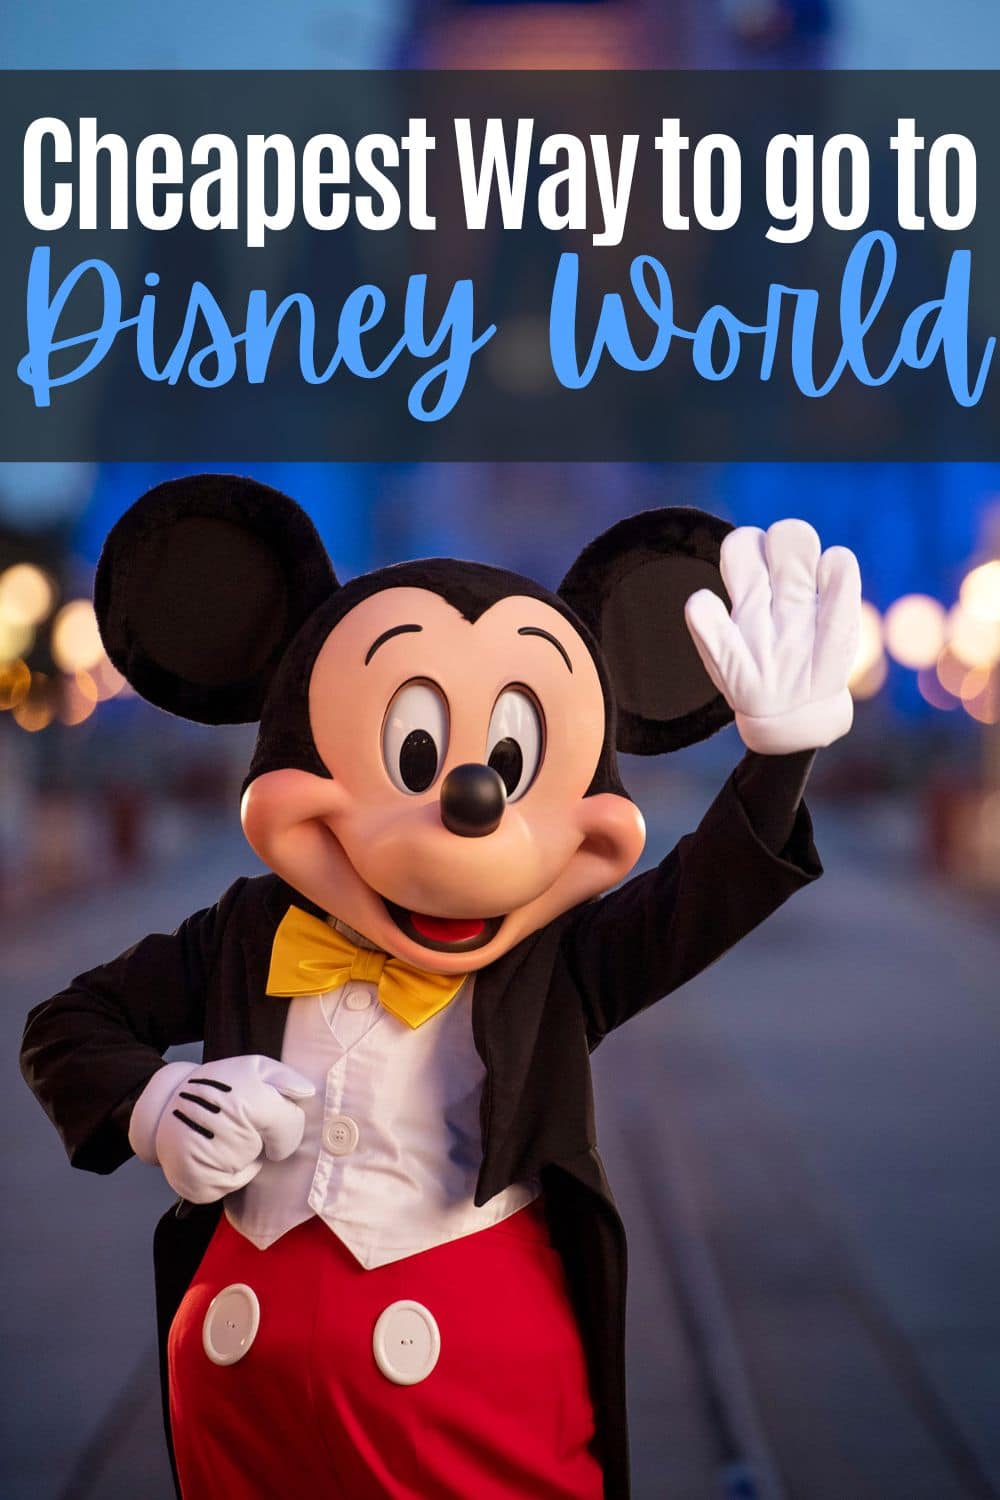 Cheapest way to go to Disney World